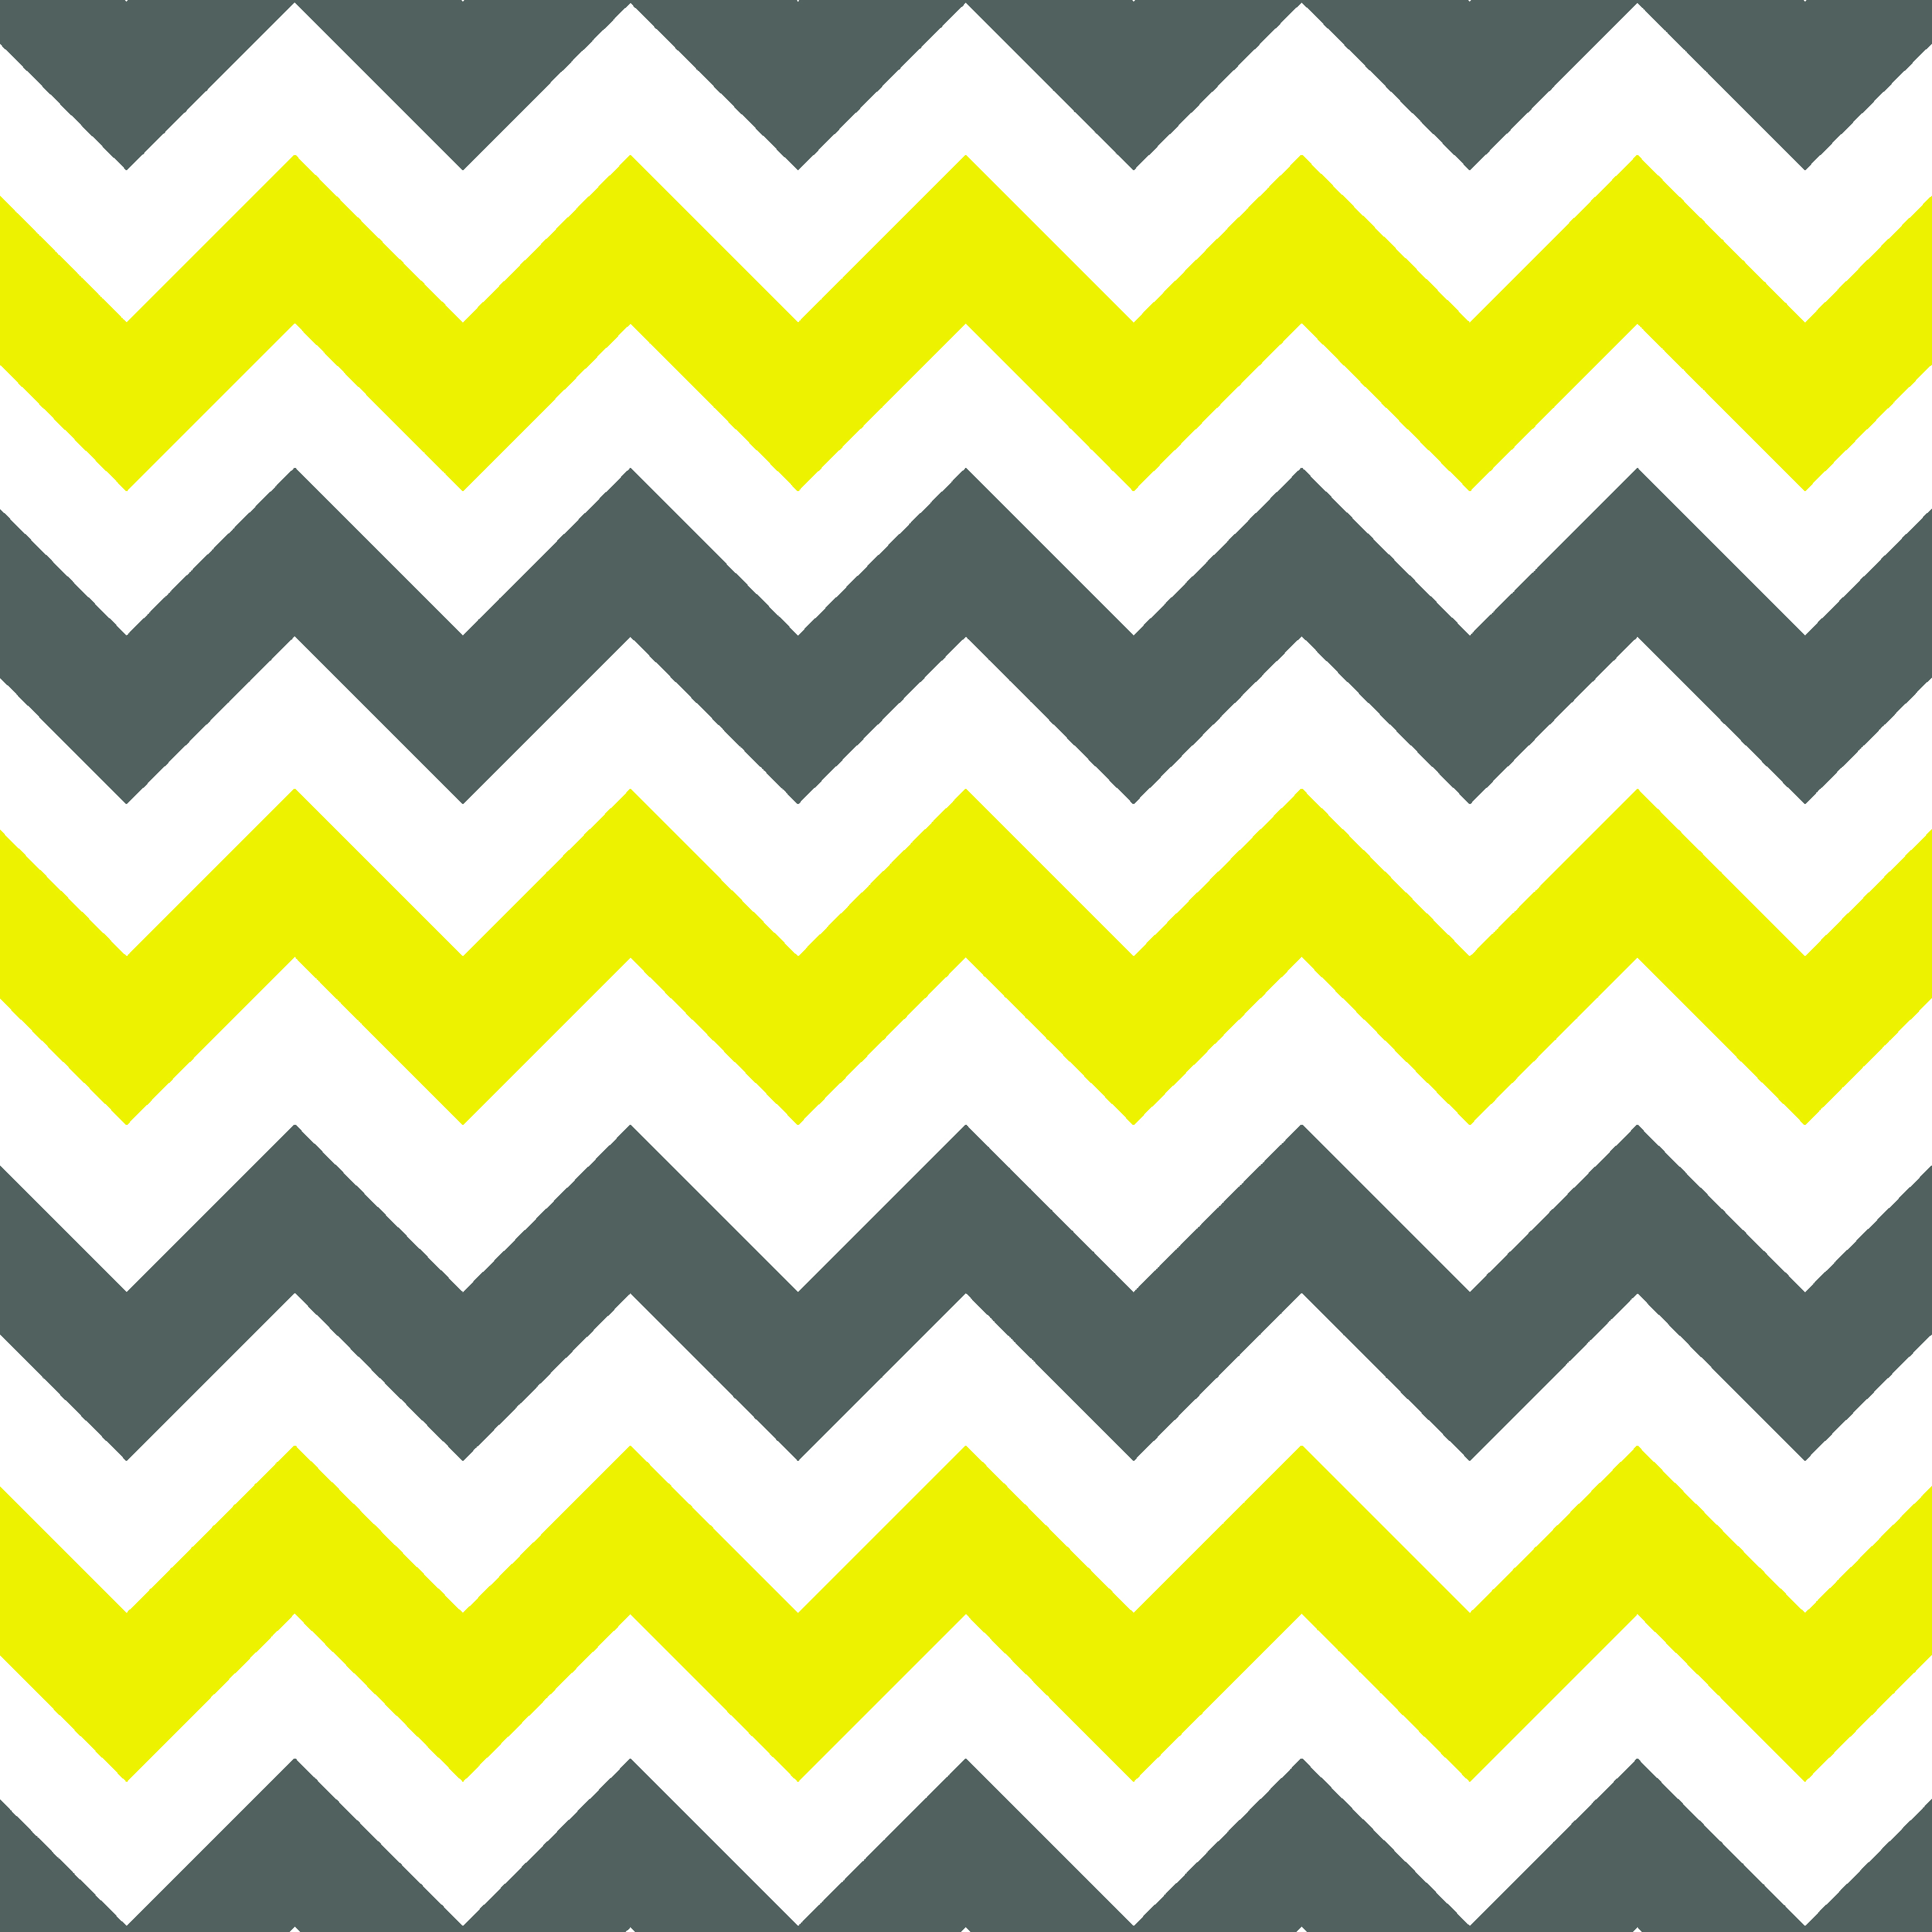 6 Free Multi-Colored Chevron Printable Papers » SHYbyDESIGN